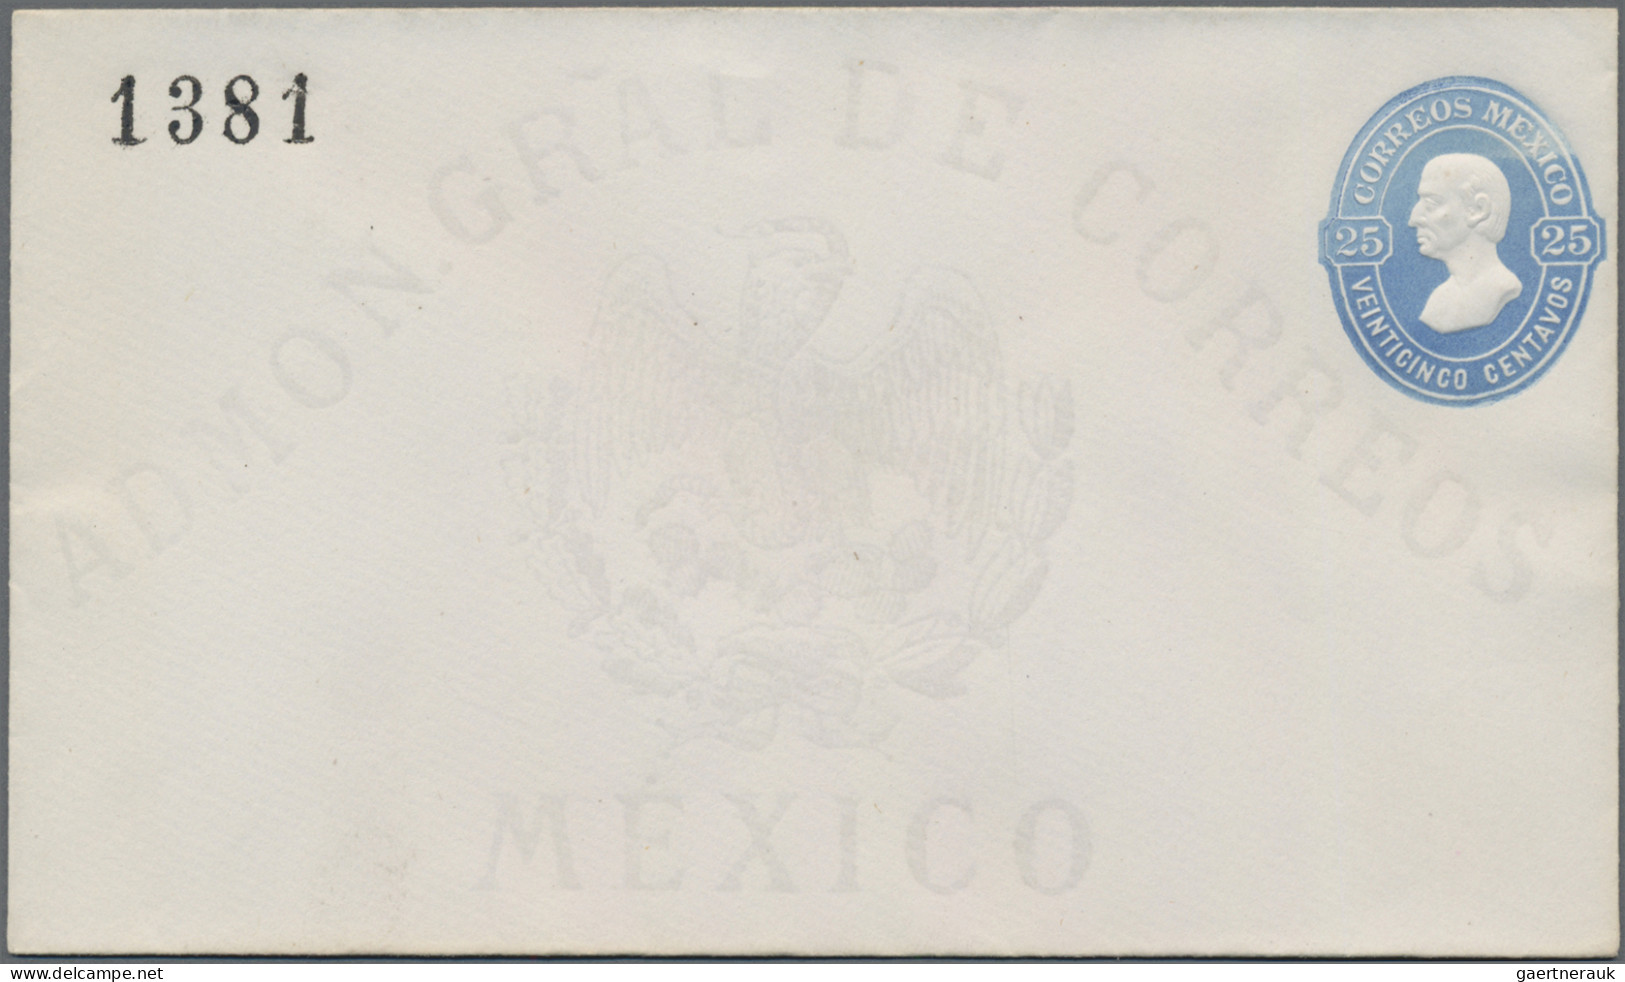 Mexico - Postal stationary: 1880/82, envelopes (6) 4 C., 10 C. and 25 C. with di